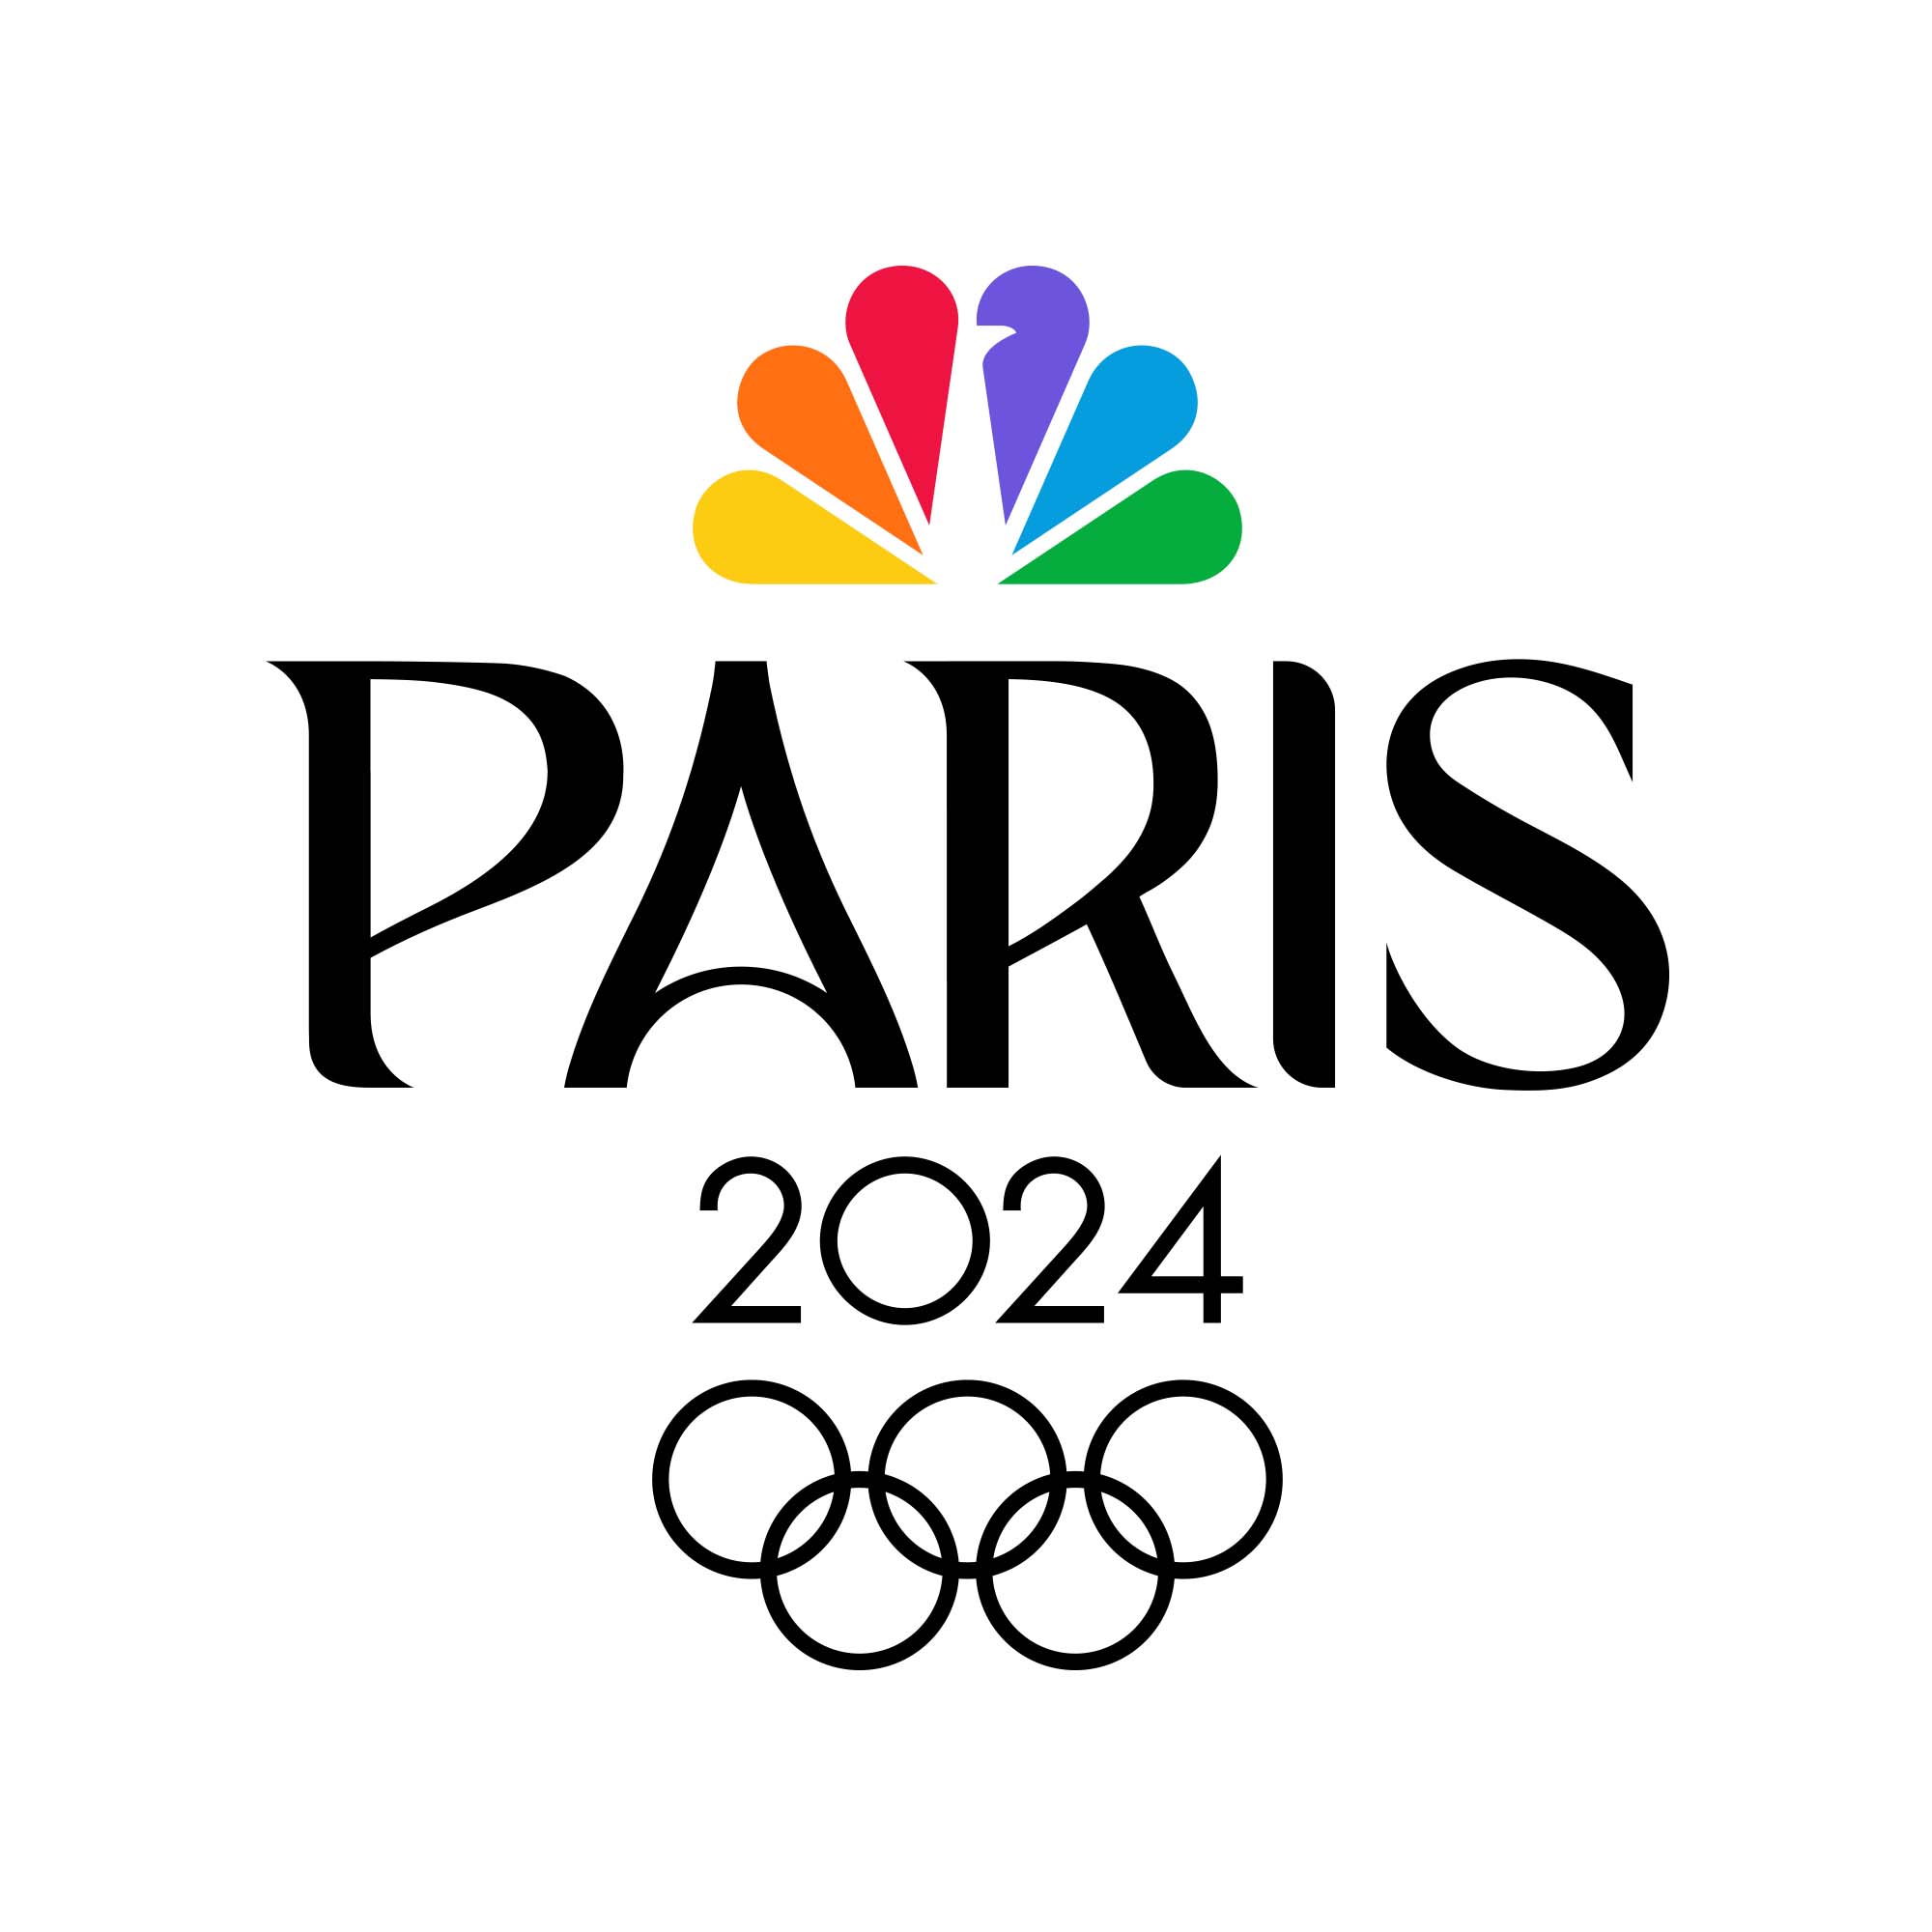 NBCUniversal Teams Up With Twitter to Promote 2024 Paris Olympics Next TV